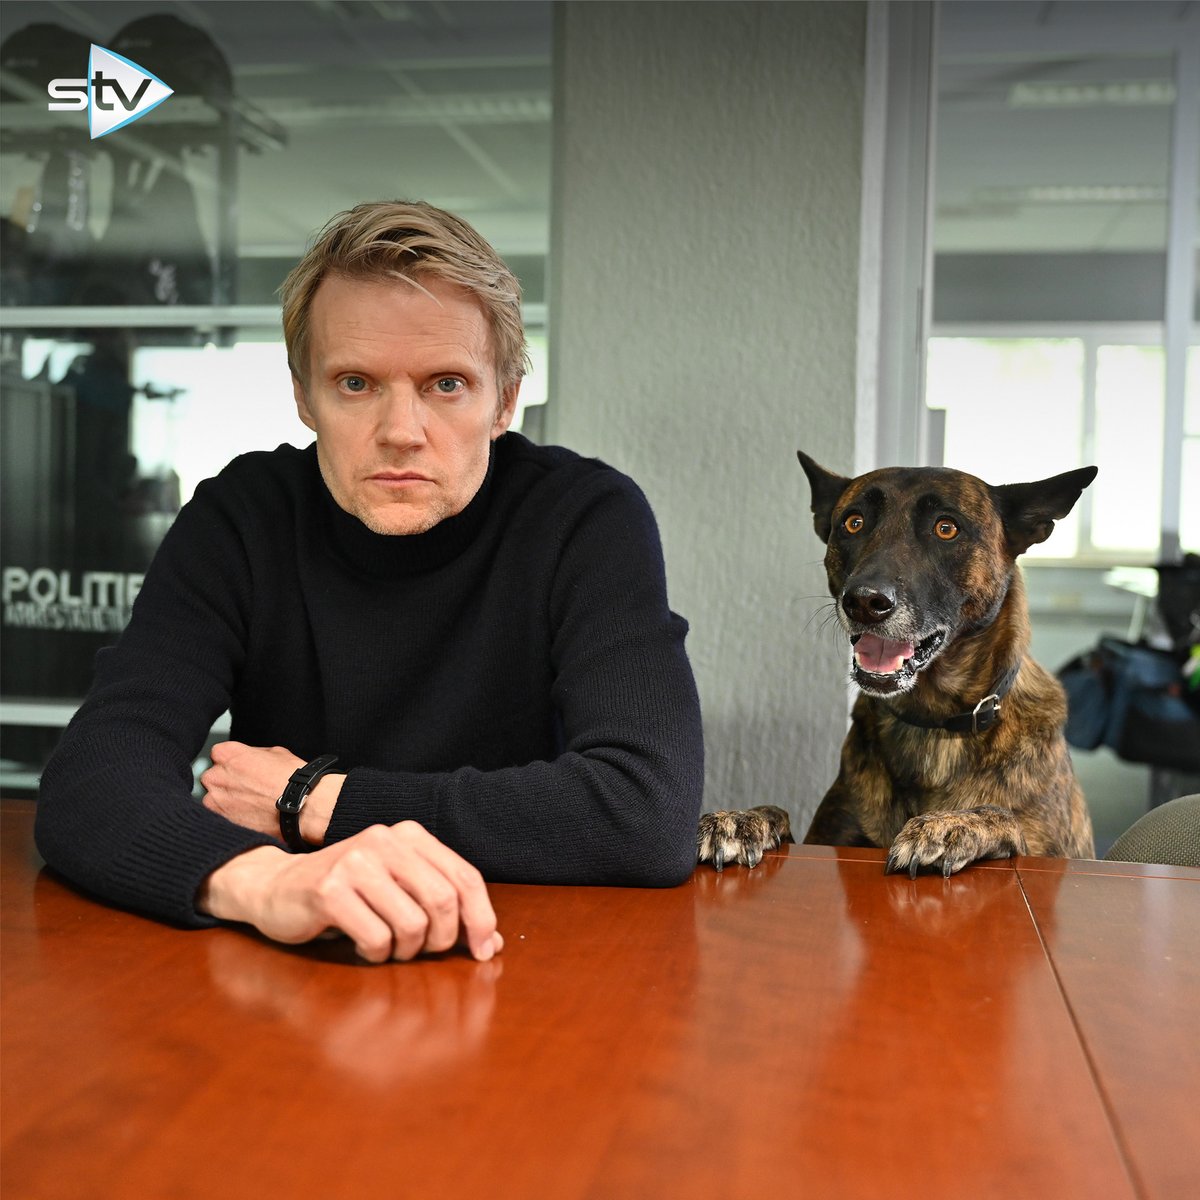 Loving the return of @ITV 's Van Der Valk season 3 with the brilliant Marc Warren. Sadly Trojan the dog who appeared in seasons 1 and 2 passed away. Here's Marc with the shows new dog, Sniffer 😊 #Vandervalk #Marcwarren #TVseries #Dogs #Sniffer #Trojan #tuesdaymotivations